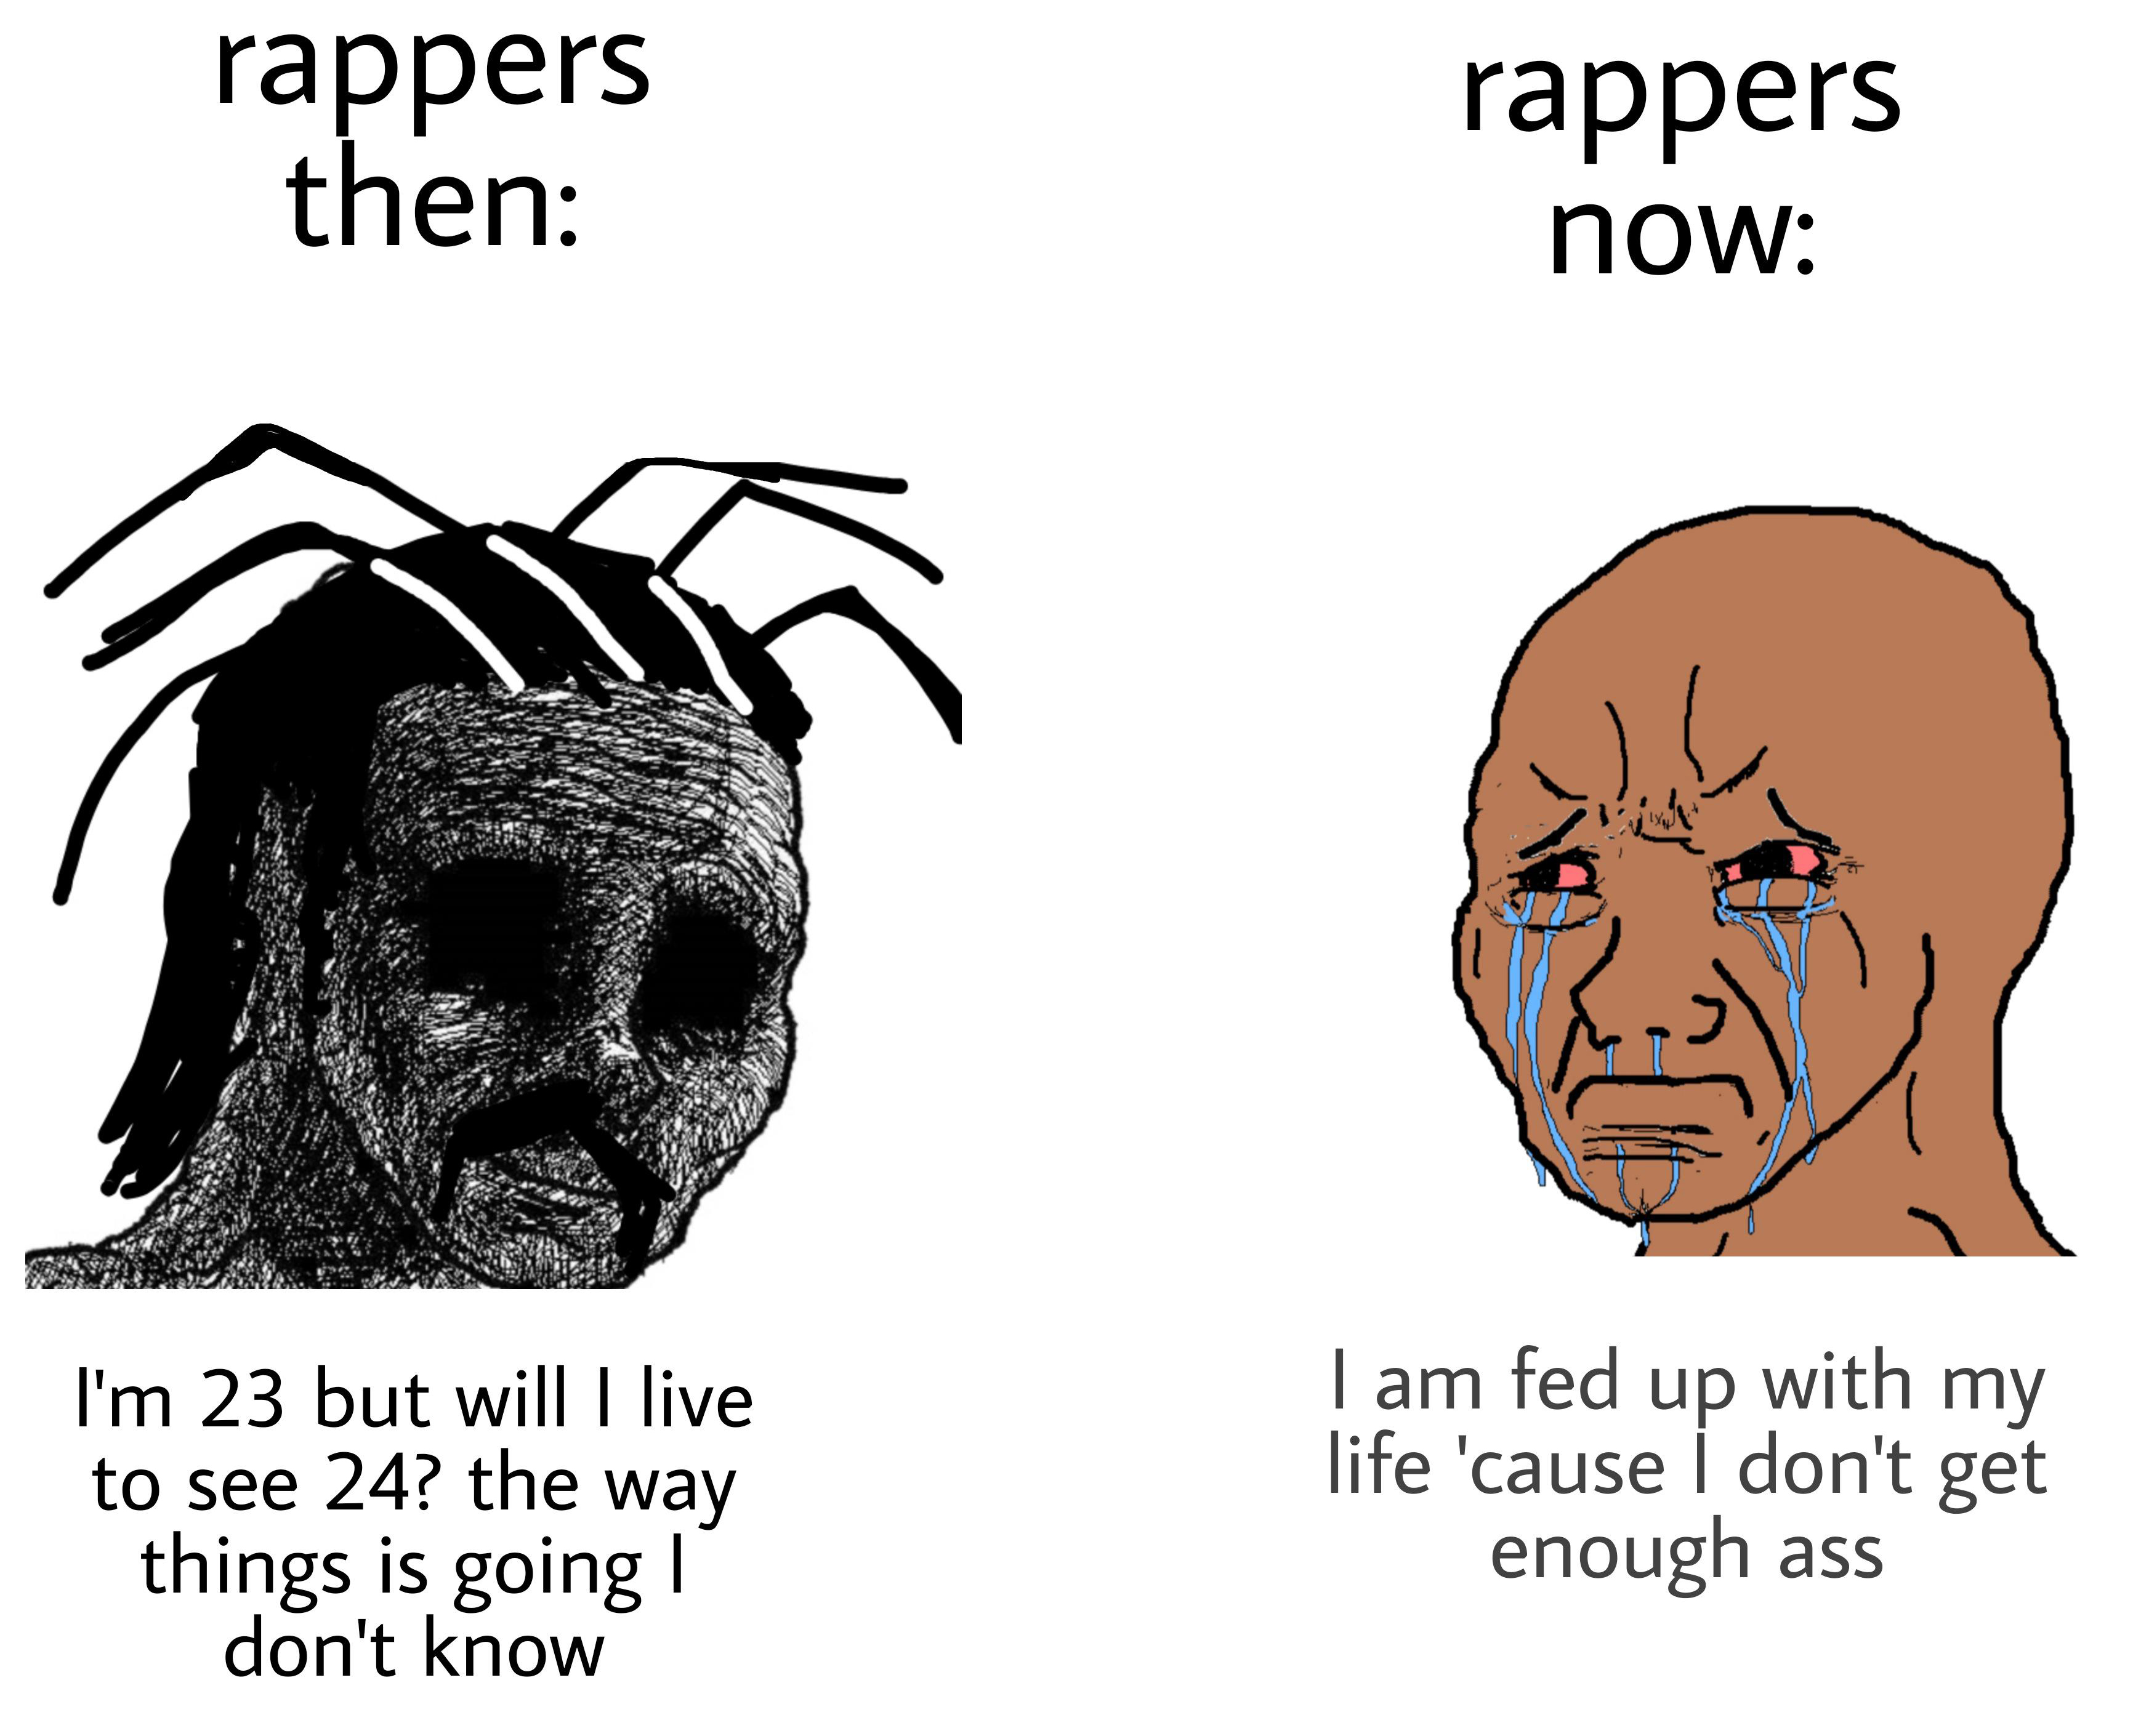 dank memes - funny memes - cartoon - rappers then rappers now I'm 23 but will I live to see 24? the way things is going ! don't know I am fed up with my life 'cause I don't get enough ass